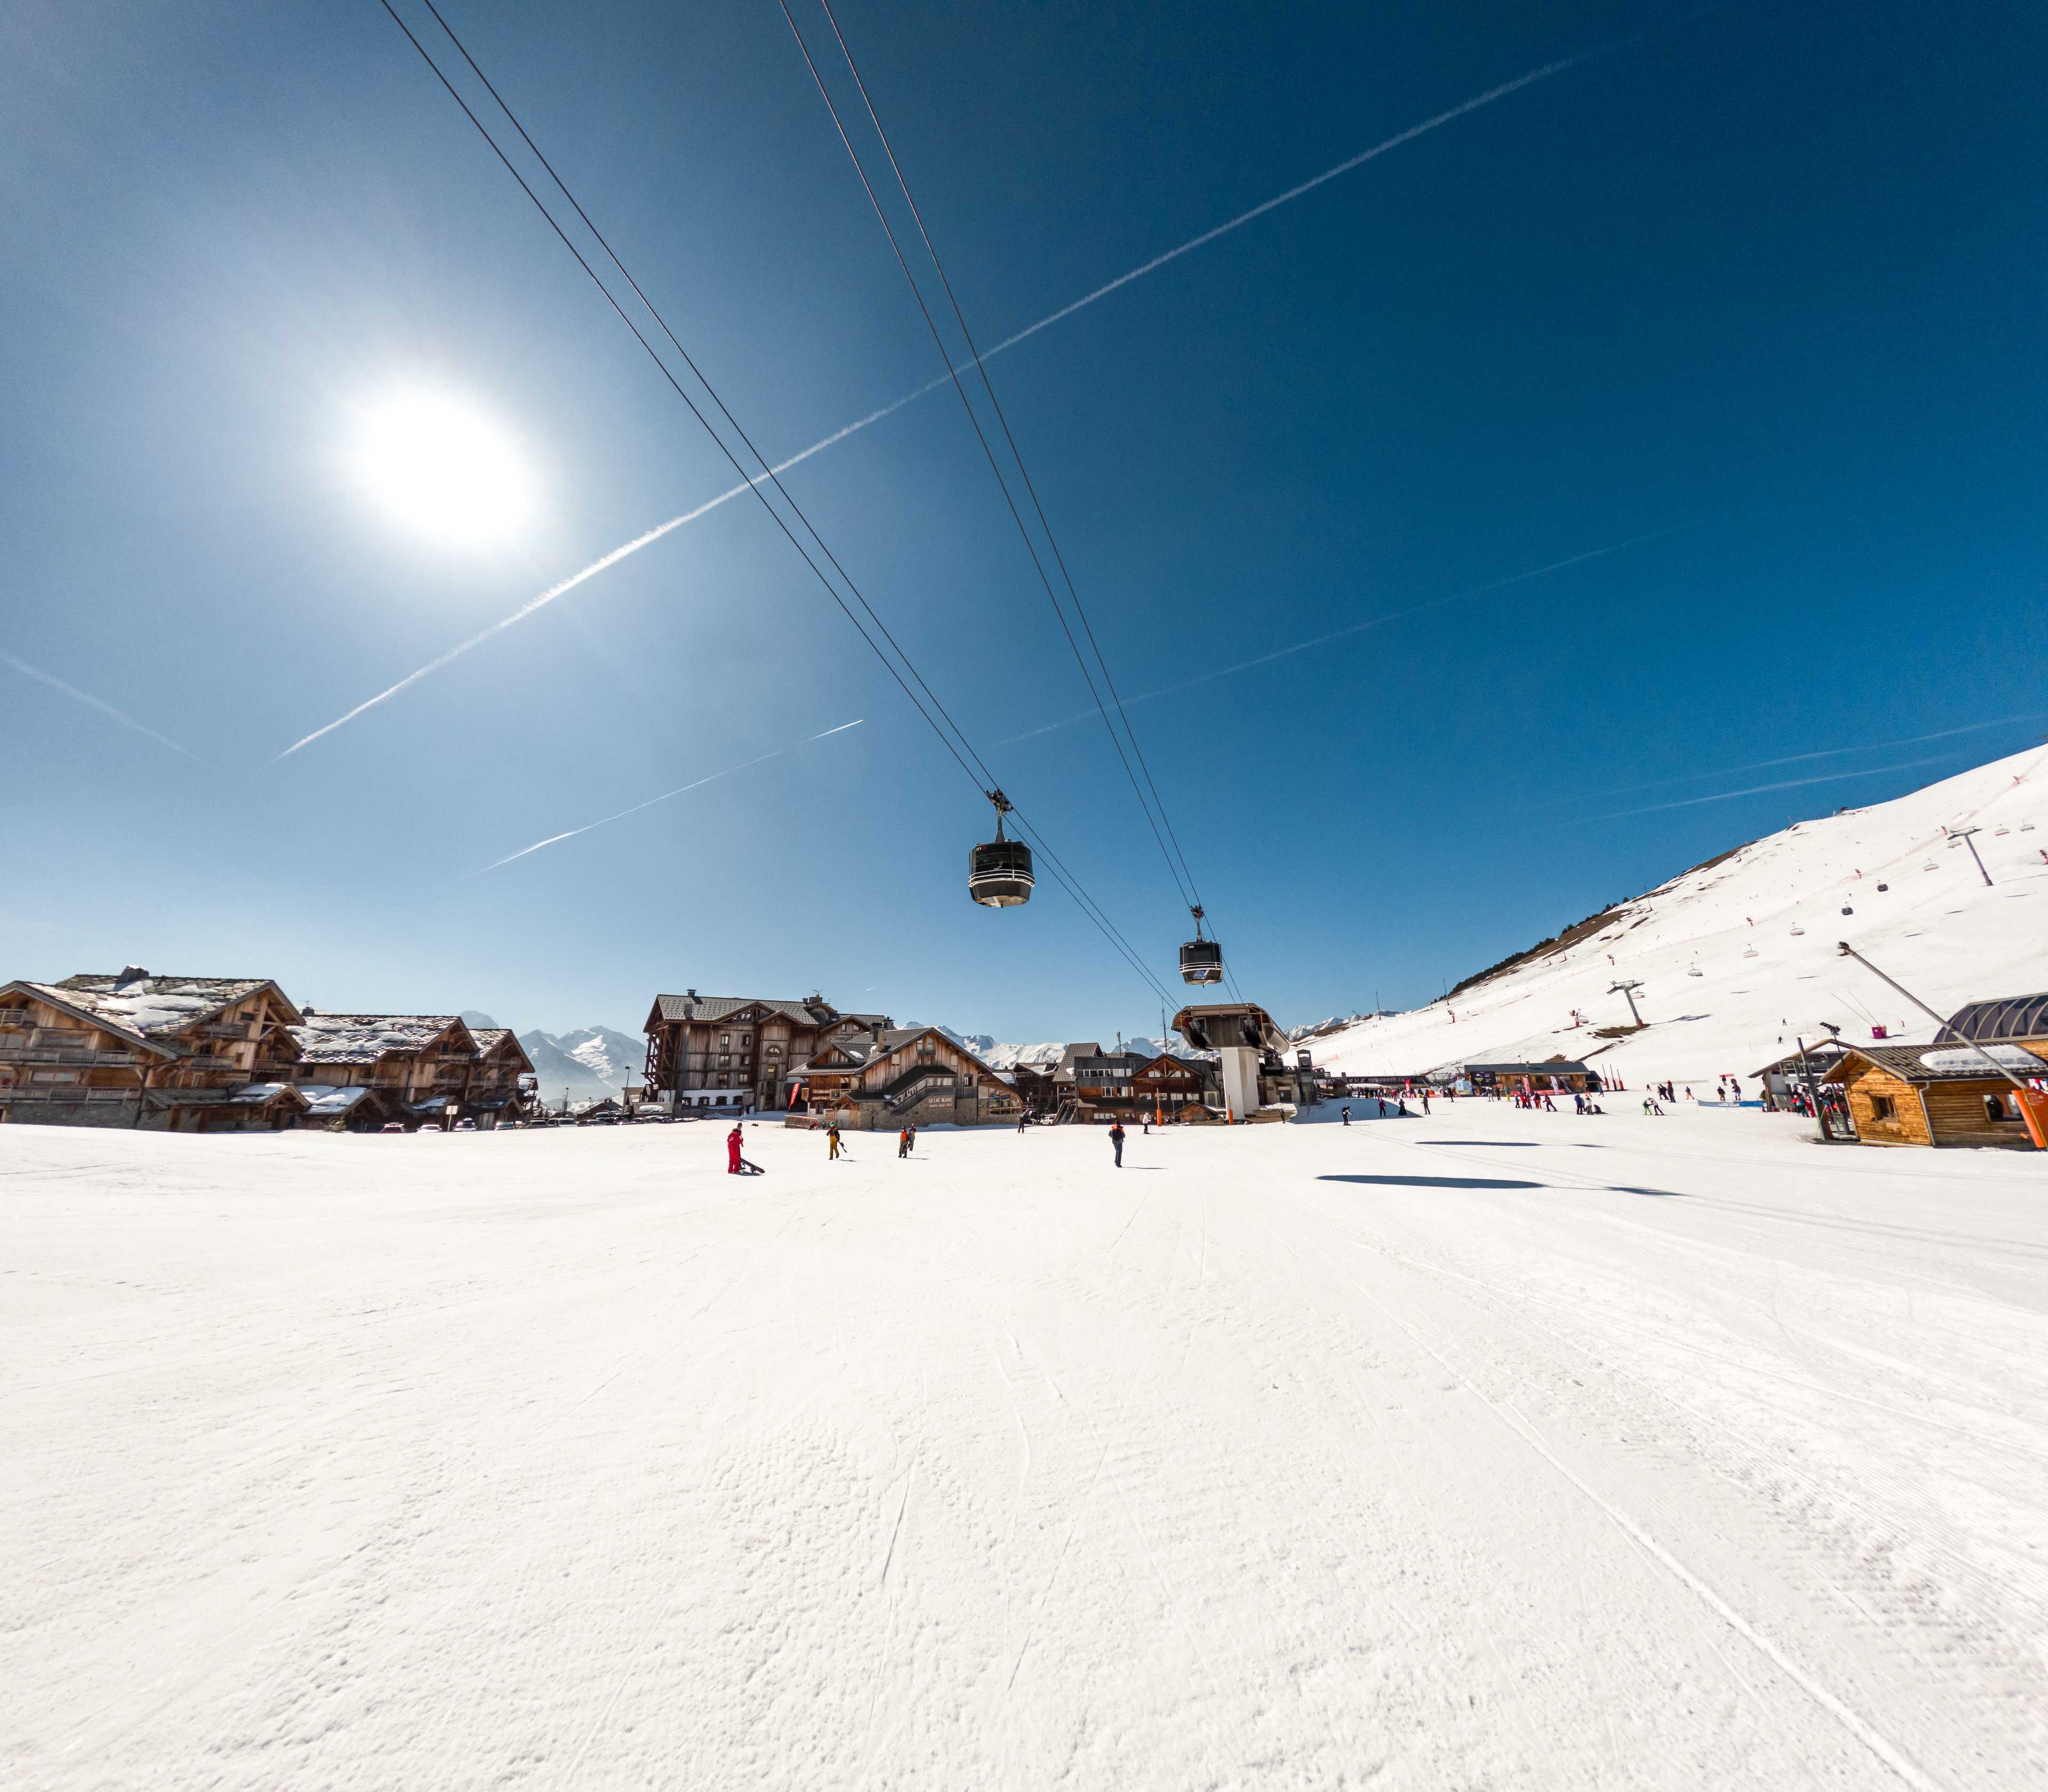 DMC: one of the core cable cars in Alpe d'Huez